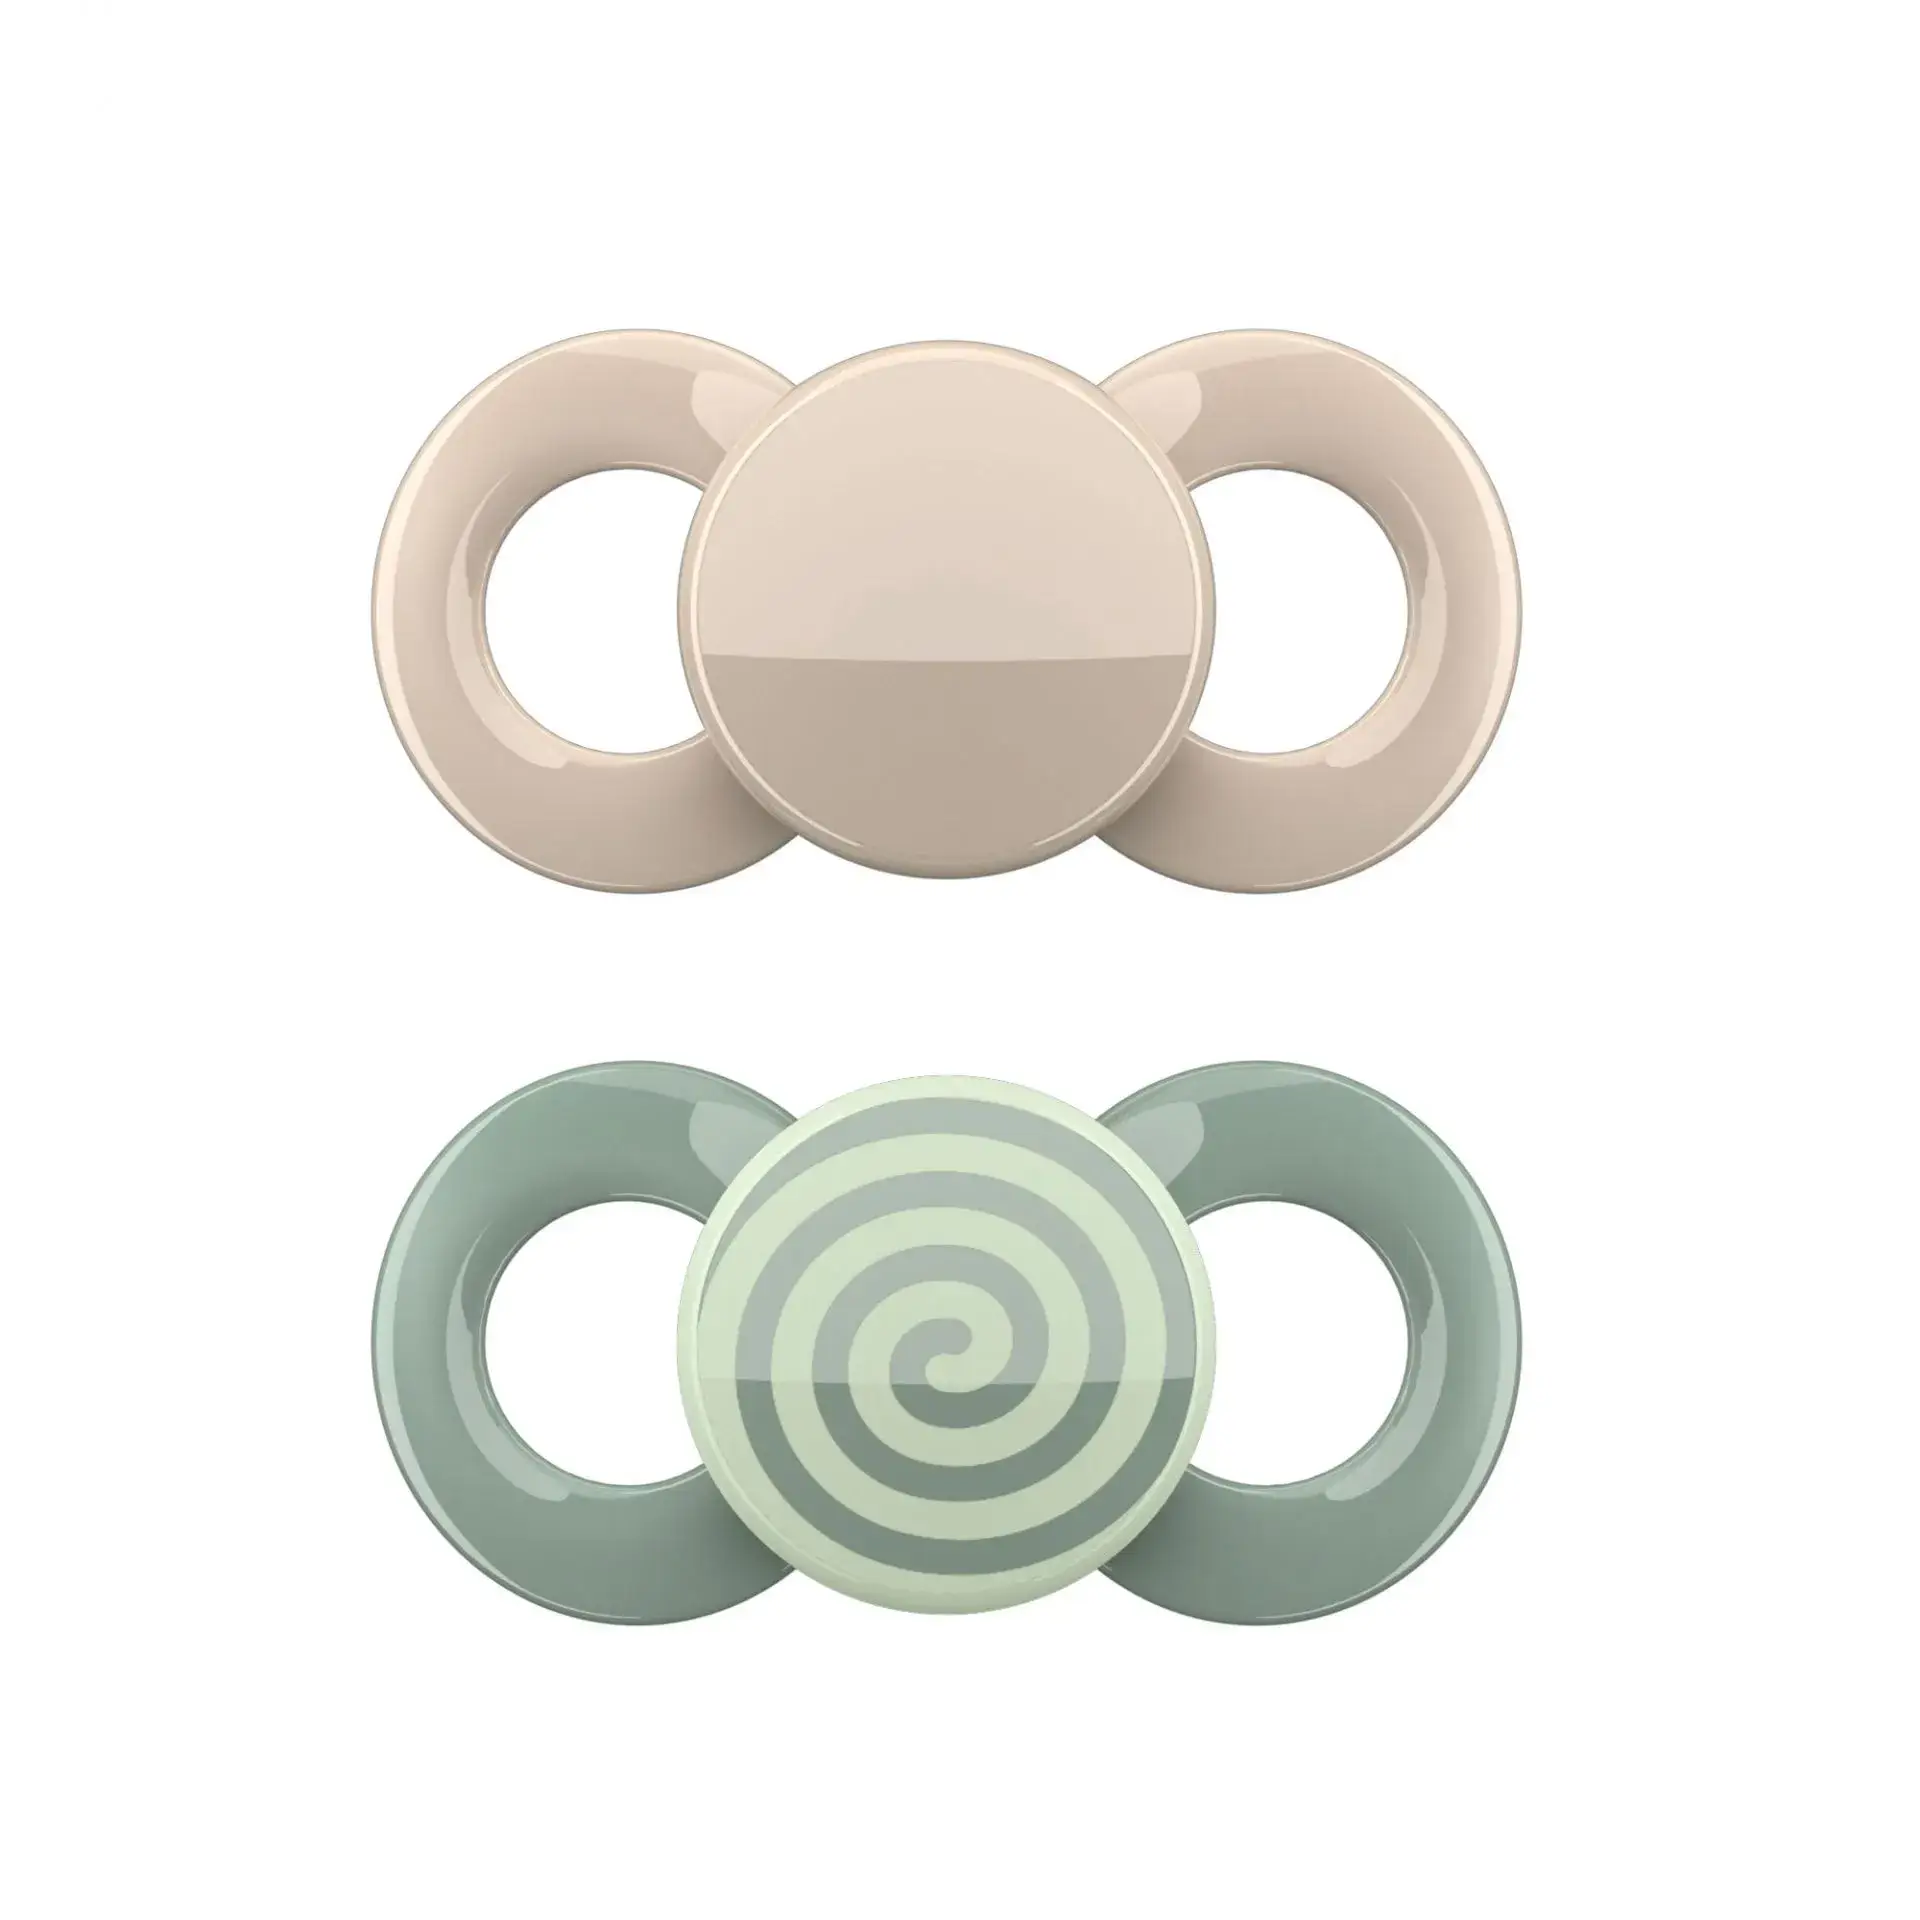 Dentistar day & night pacifier, green and beige, set of 2, 6 - 14 months